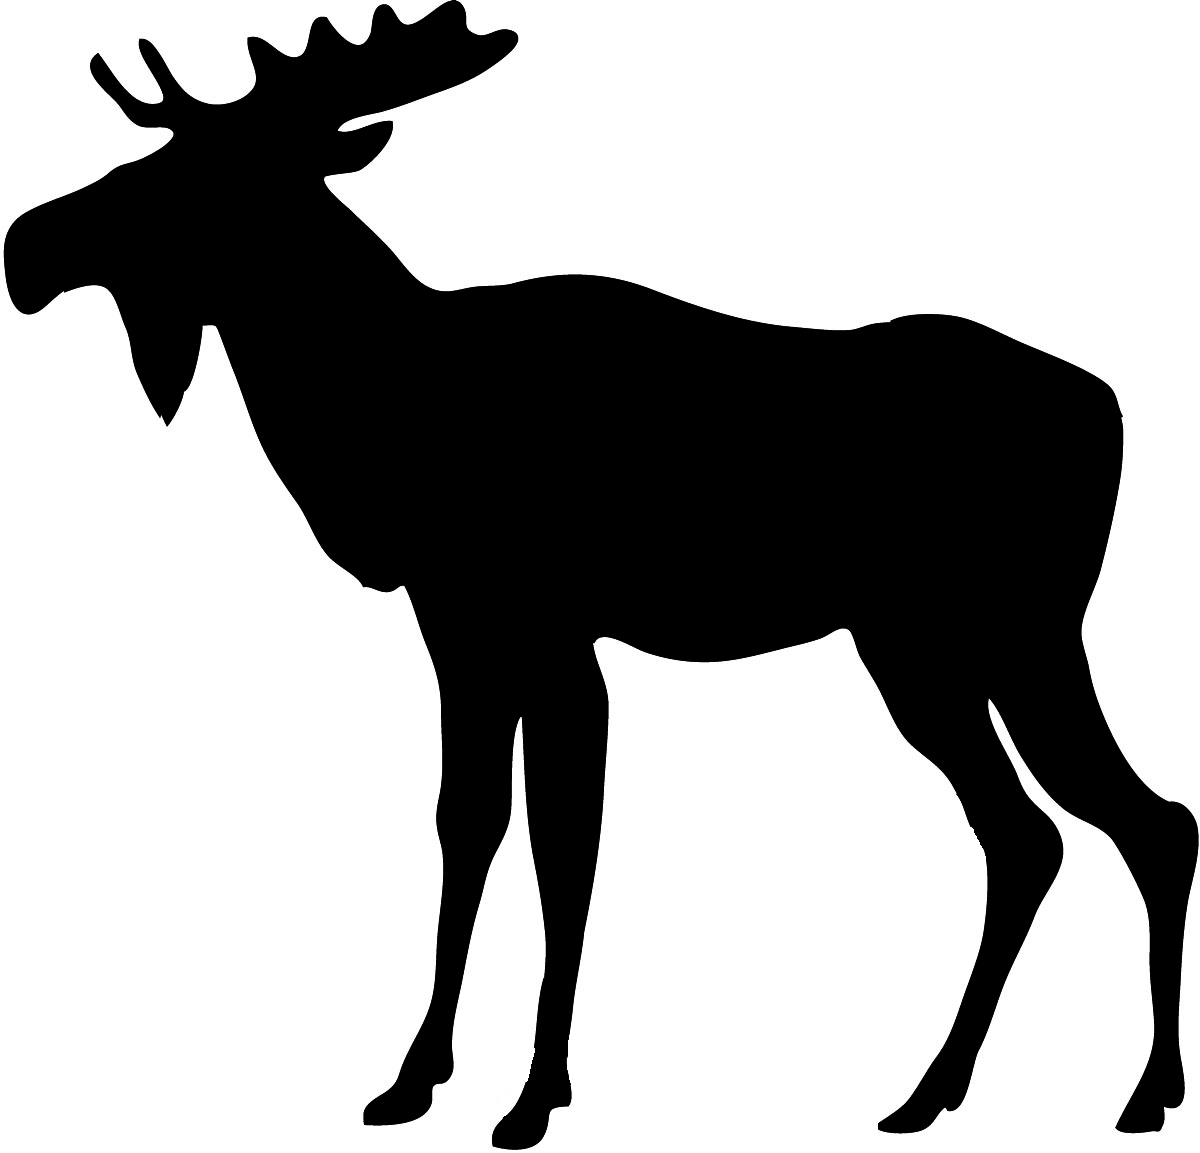 Image of Moose Clipart #7679, Moose Clip Art Silhouette Free ...